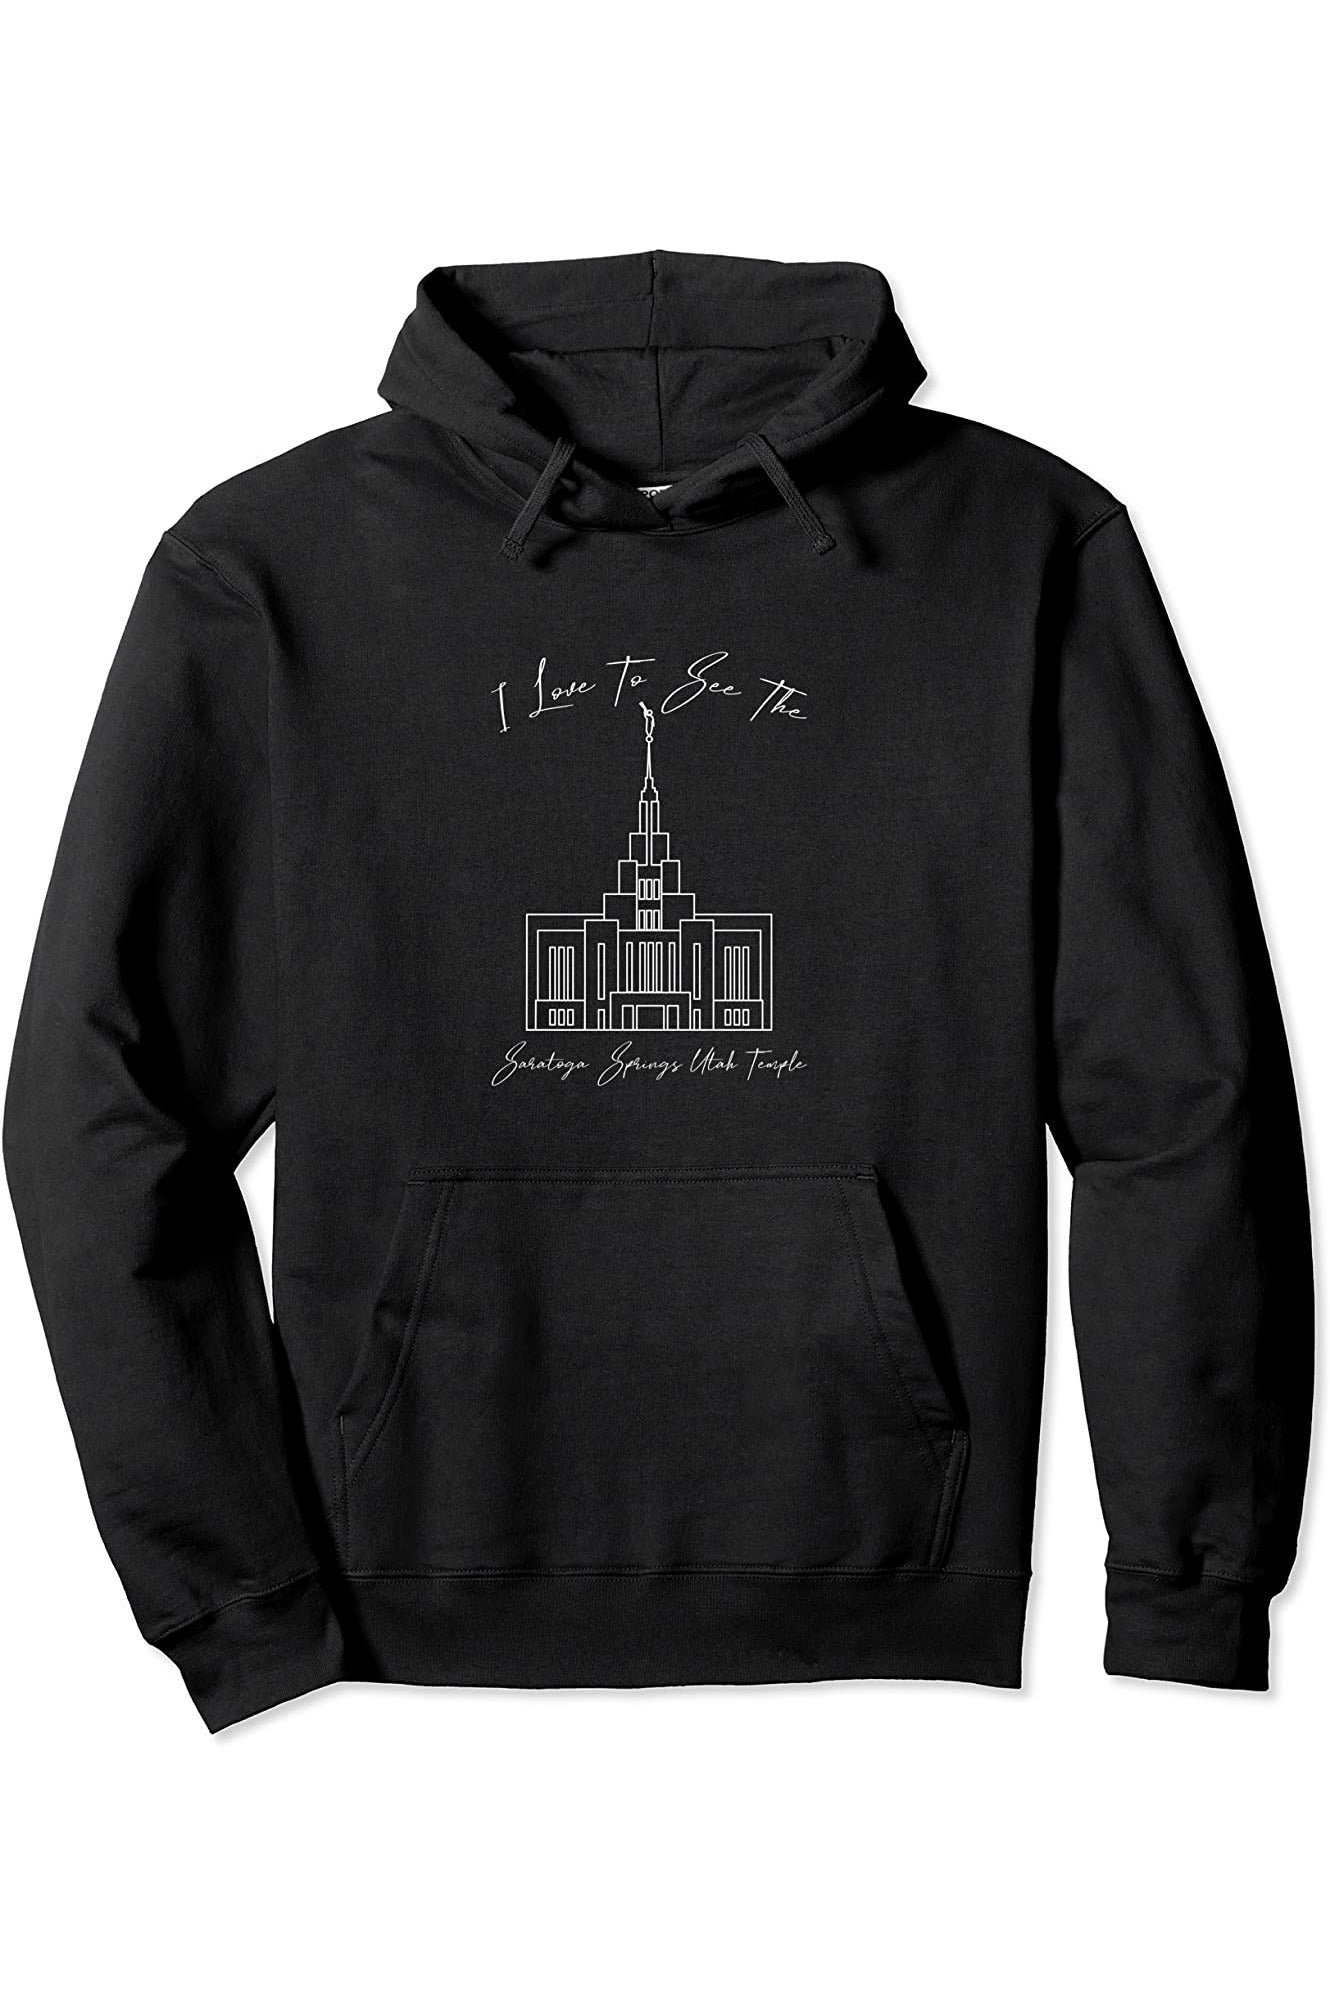 Saratoga Springs Utah Temple Pullover Hoodie - Calligraphy Style (English) US